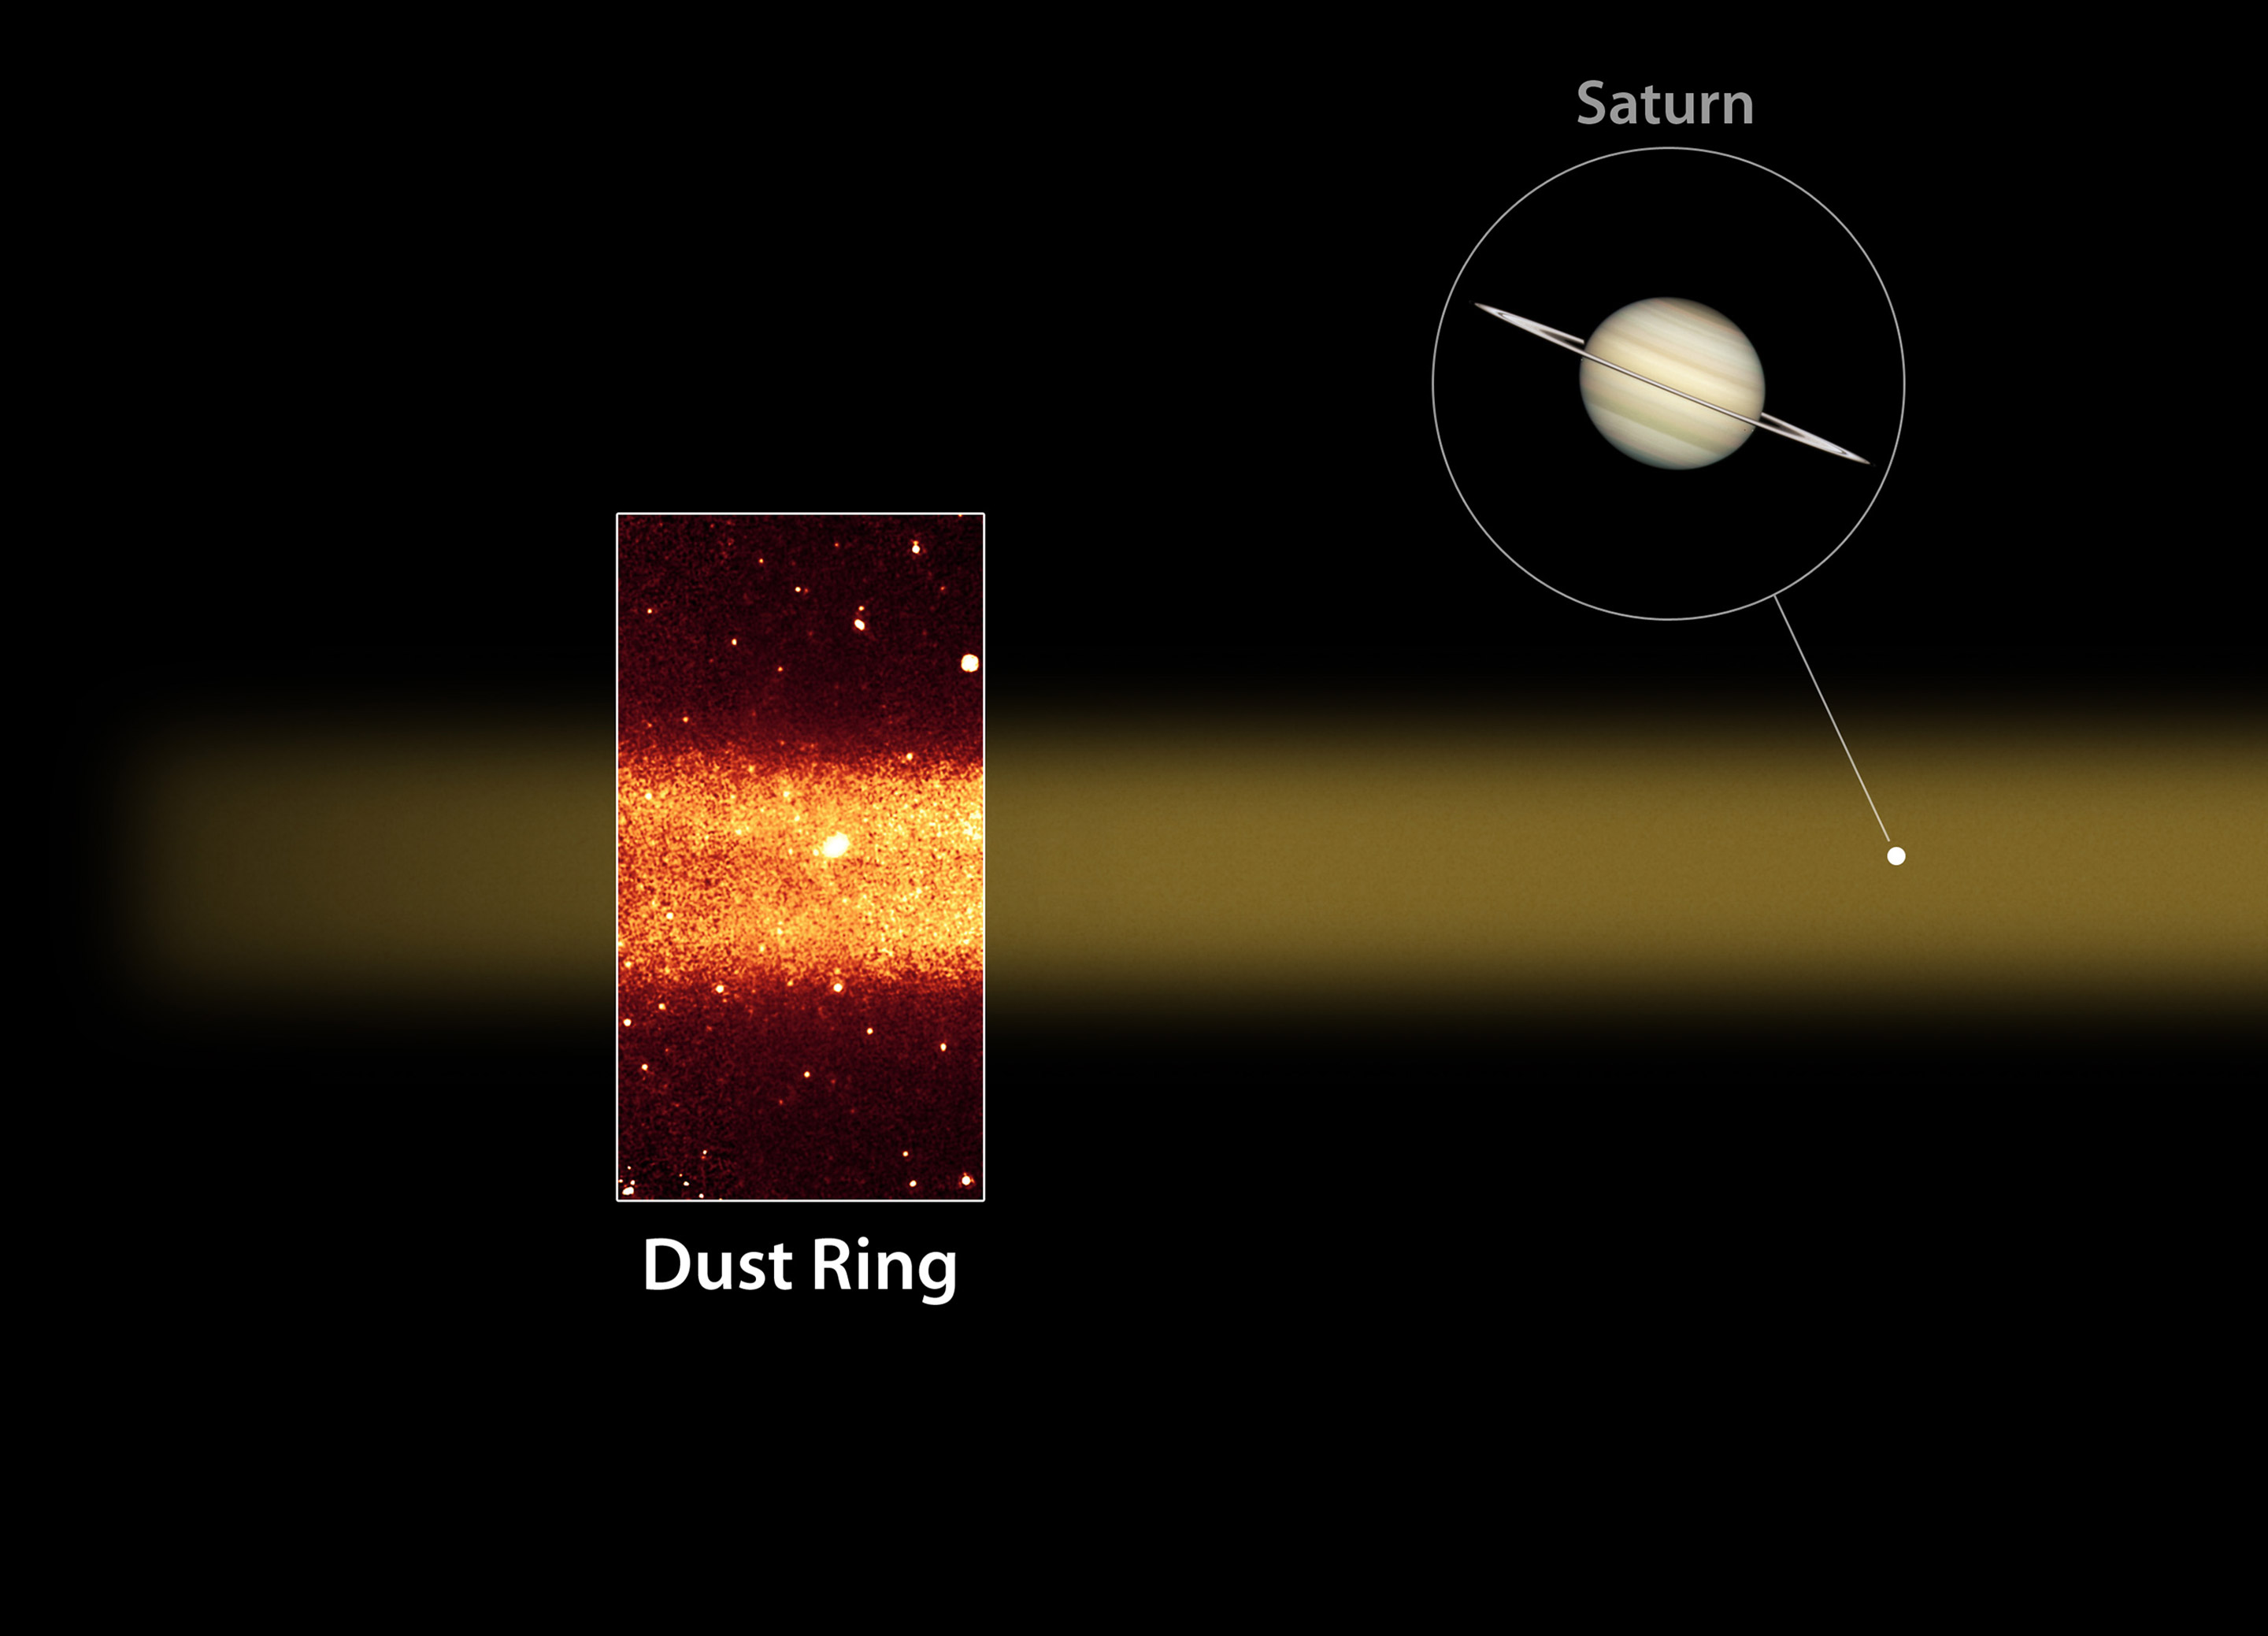 Saturn’s Largest Ring: Spitzer surprised astronomers in 2009 when it discovered Saturn’s largest ring, a slice of which is highlighted in this diagram. Credit: NASA/JPL-Caltech/Univ. of Virginia